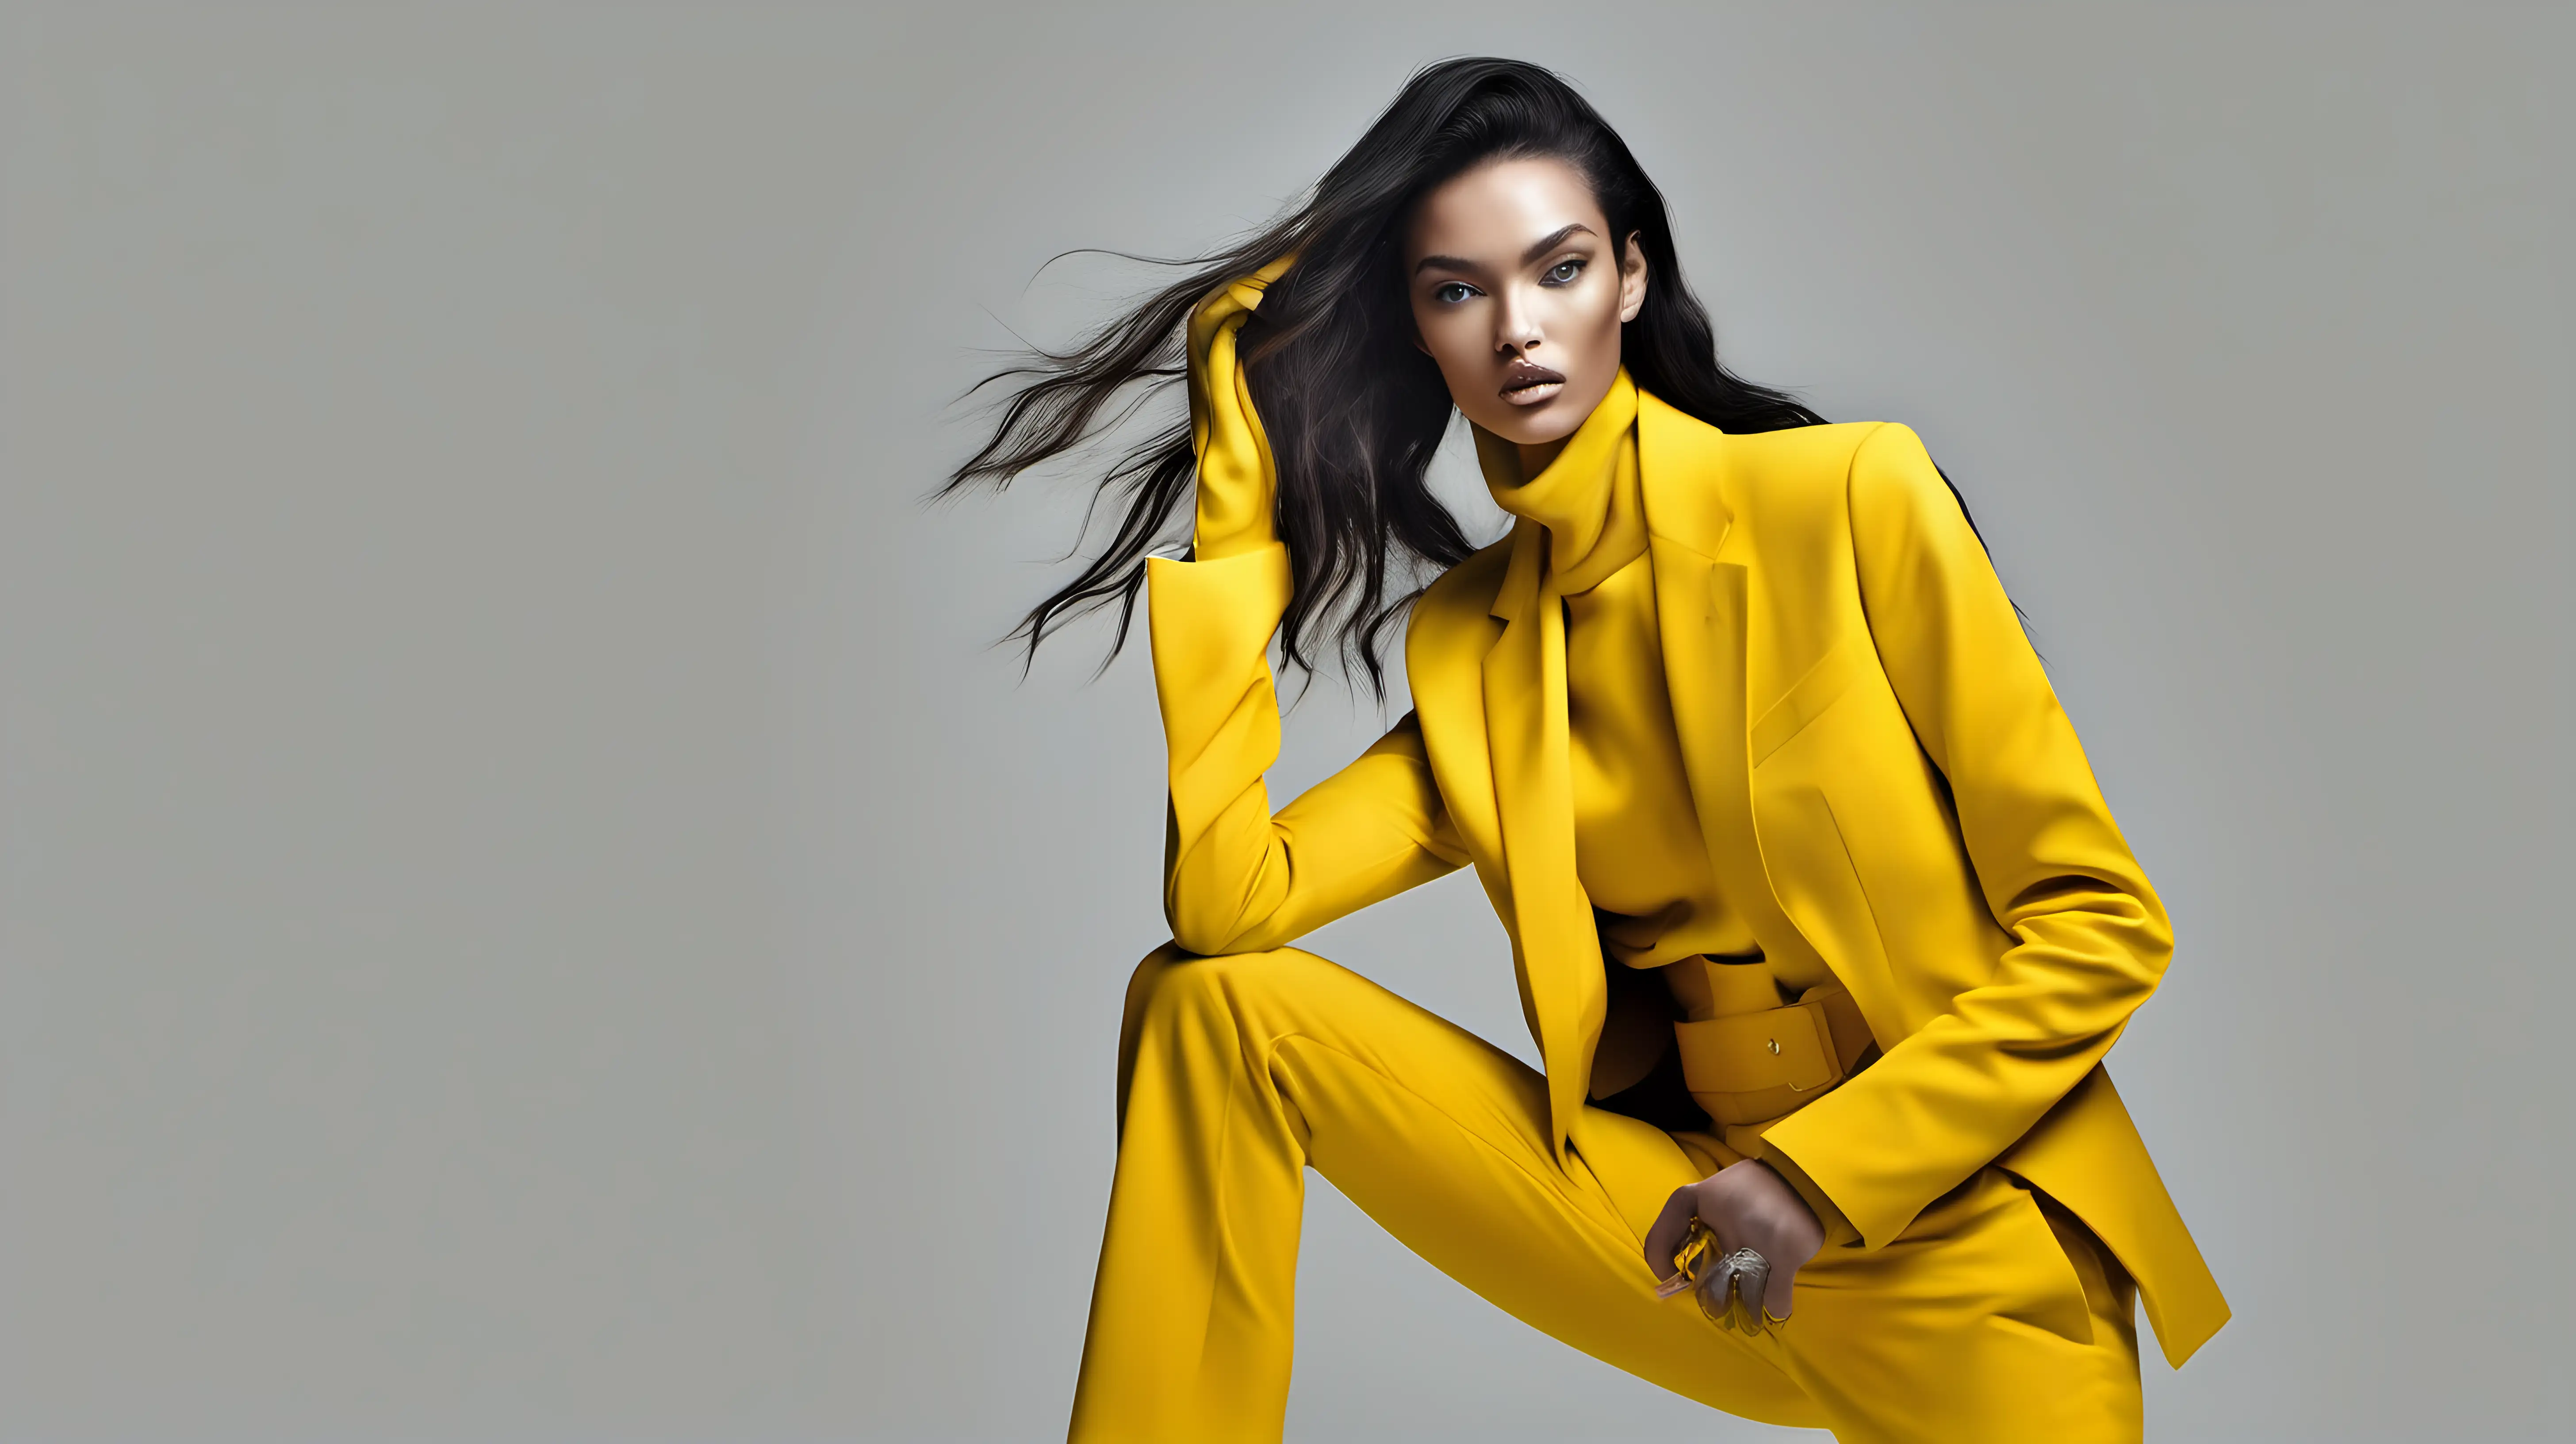 Contrasting Yellow Fashion Model on Clean White Background